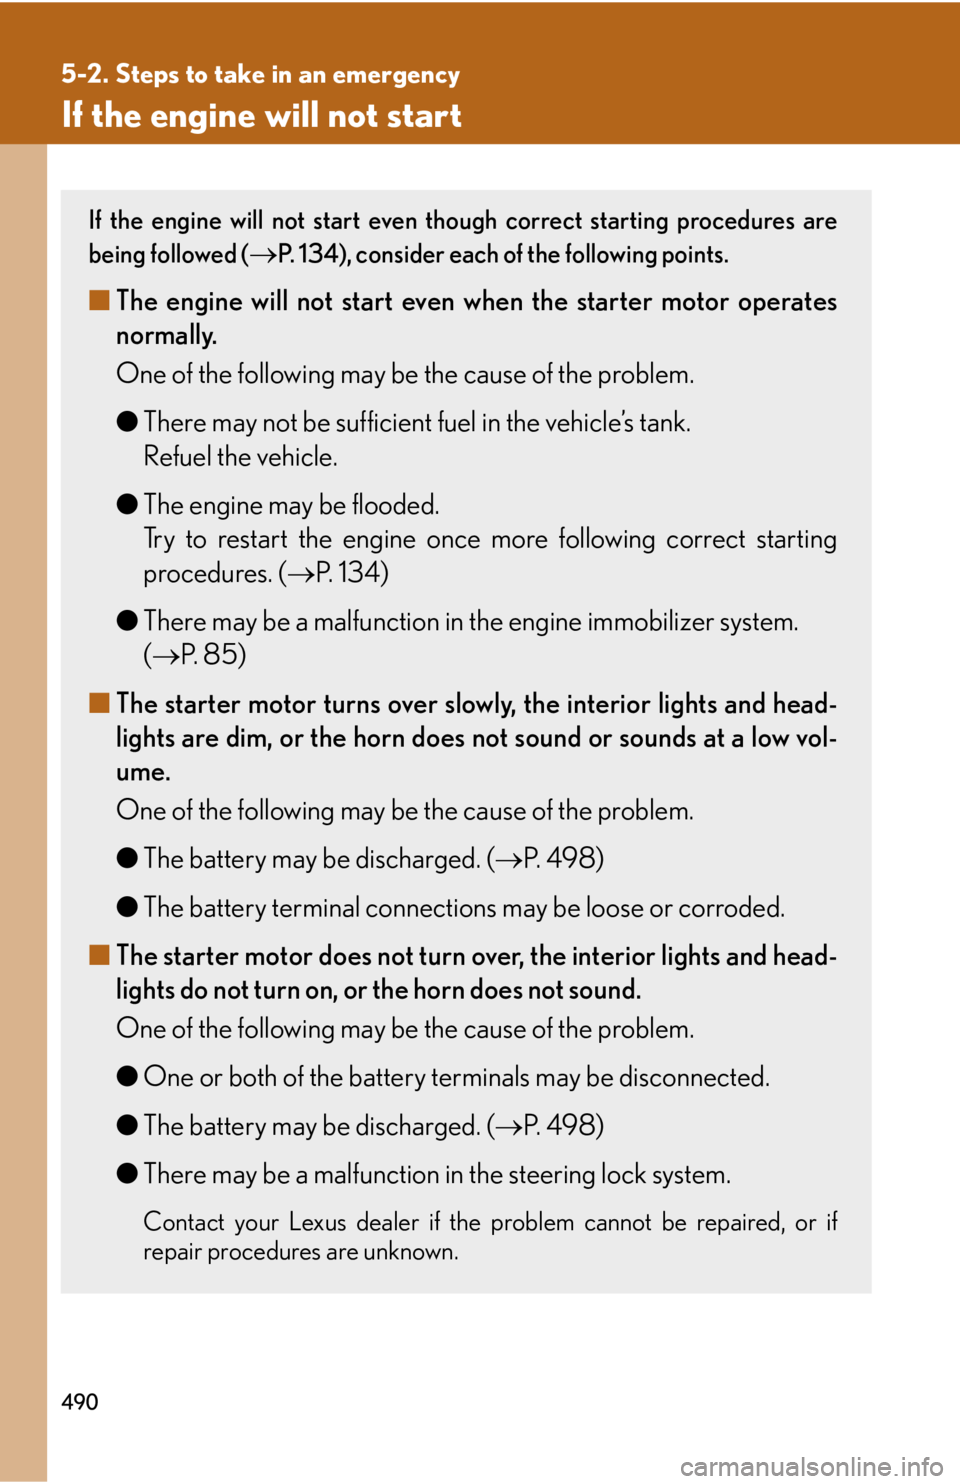 Lexus IS250 2011  Key Information / LEXUS 2011 IS250/IS350 OWNERS MANUAL (OM53839U) 490
5-2. Steps to take in an emergency
If the engine will not start
If the engine will not start even though correct starting procedures are
being followed (
P. 134), consider each of the following